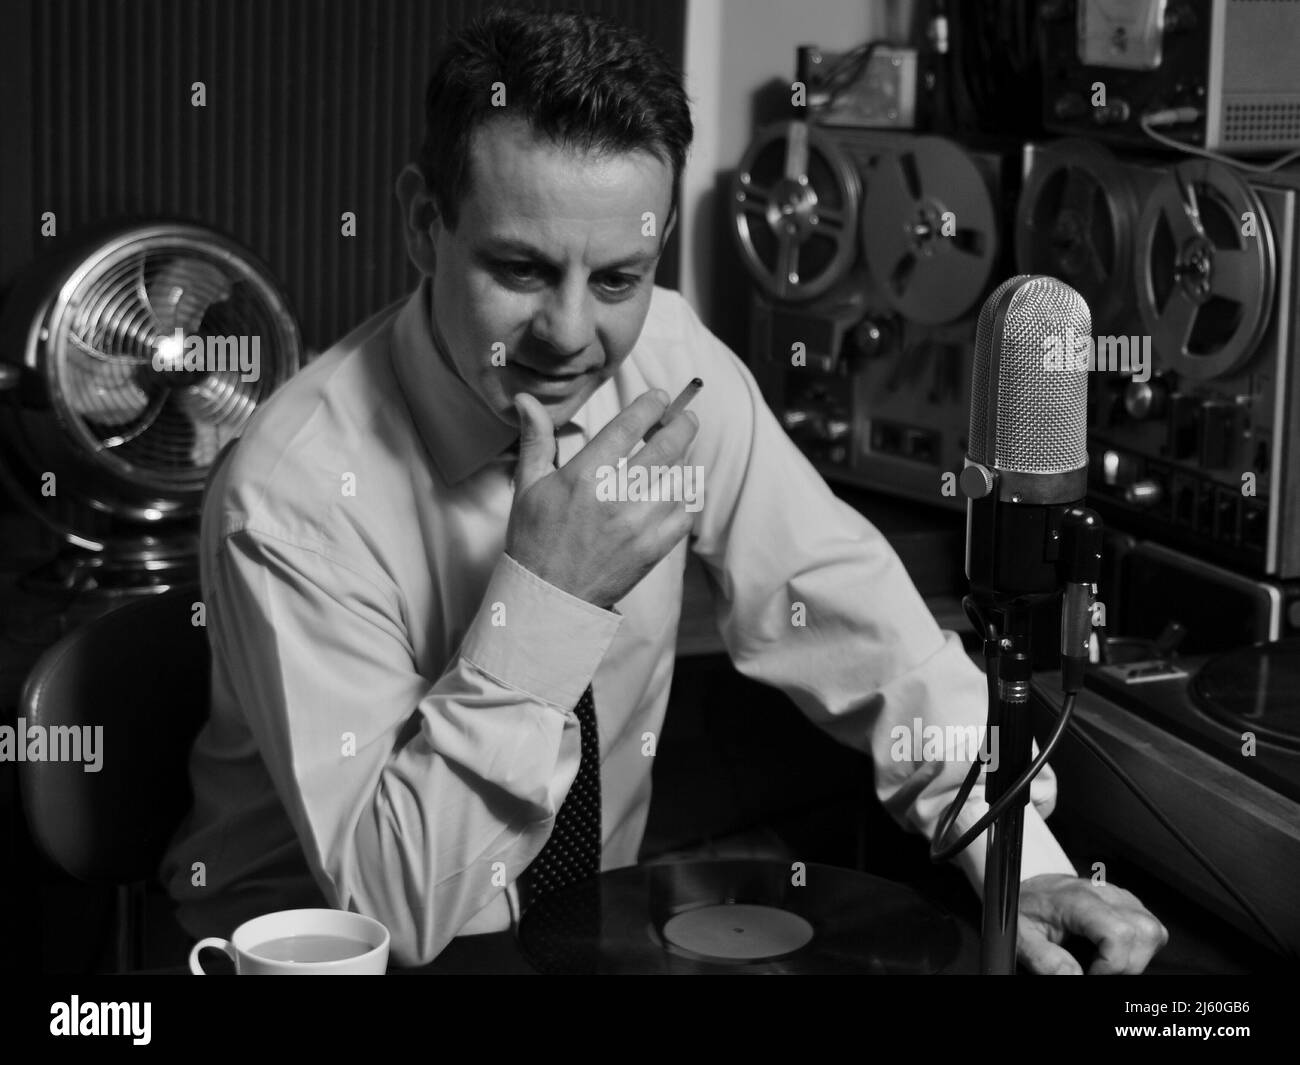 A Cool 1950's 60's Retro Radio DJ host plays music while holding record and cigarette. A classic black and white image from a bygone era. Nostalgia. Stock Photo